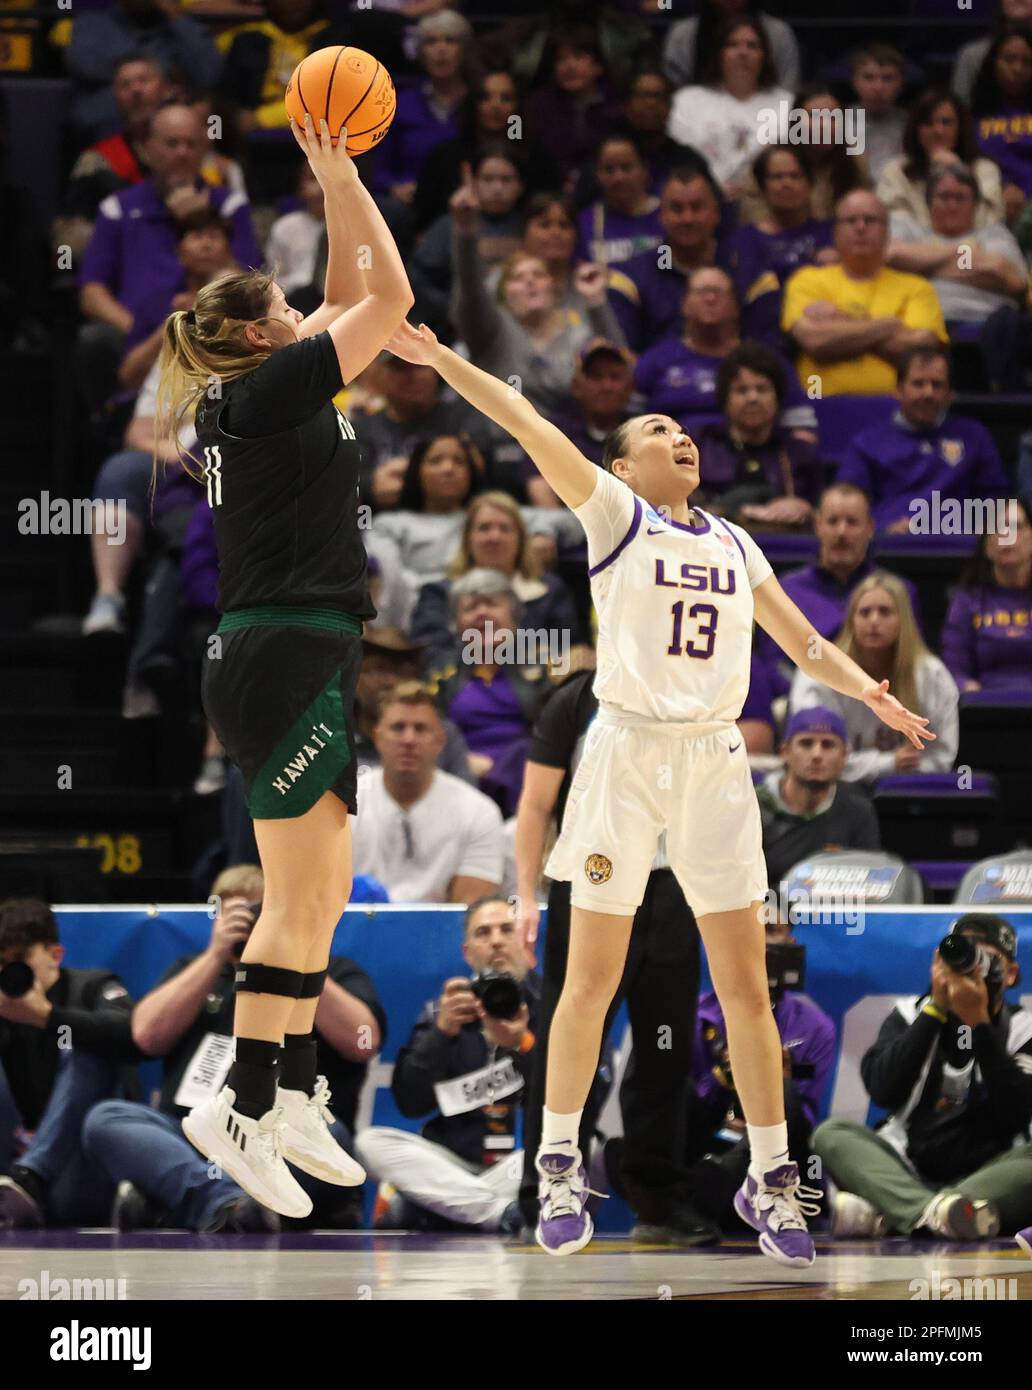 Baton Rouge, USA. 17th Mar, 2023. Hawai'i Rainbow Wahine forward Kallin Spiller (11) shoots a jumper over LSU Tigers guard Last-Tear Poa (13) during the first round of the Women's Basketball NCAA Tournament at the Pete Maravich Assembly Center in Baton Rouge, Louisiana on Friday, March 17, 2023. (Photo by Peter G. Forest/Sipa USA) Credit: Sipa USA/Alamy Live News Stock Photo